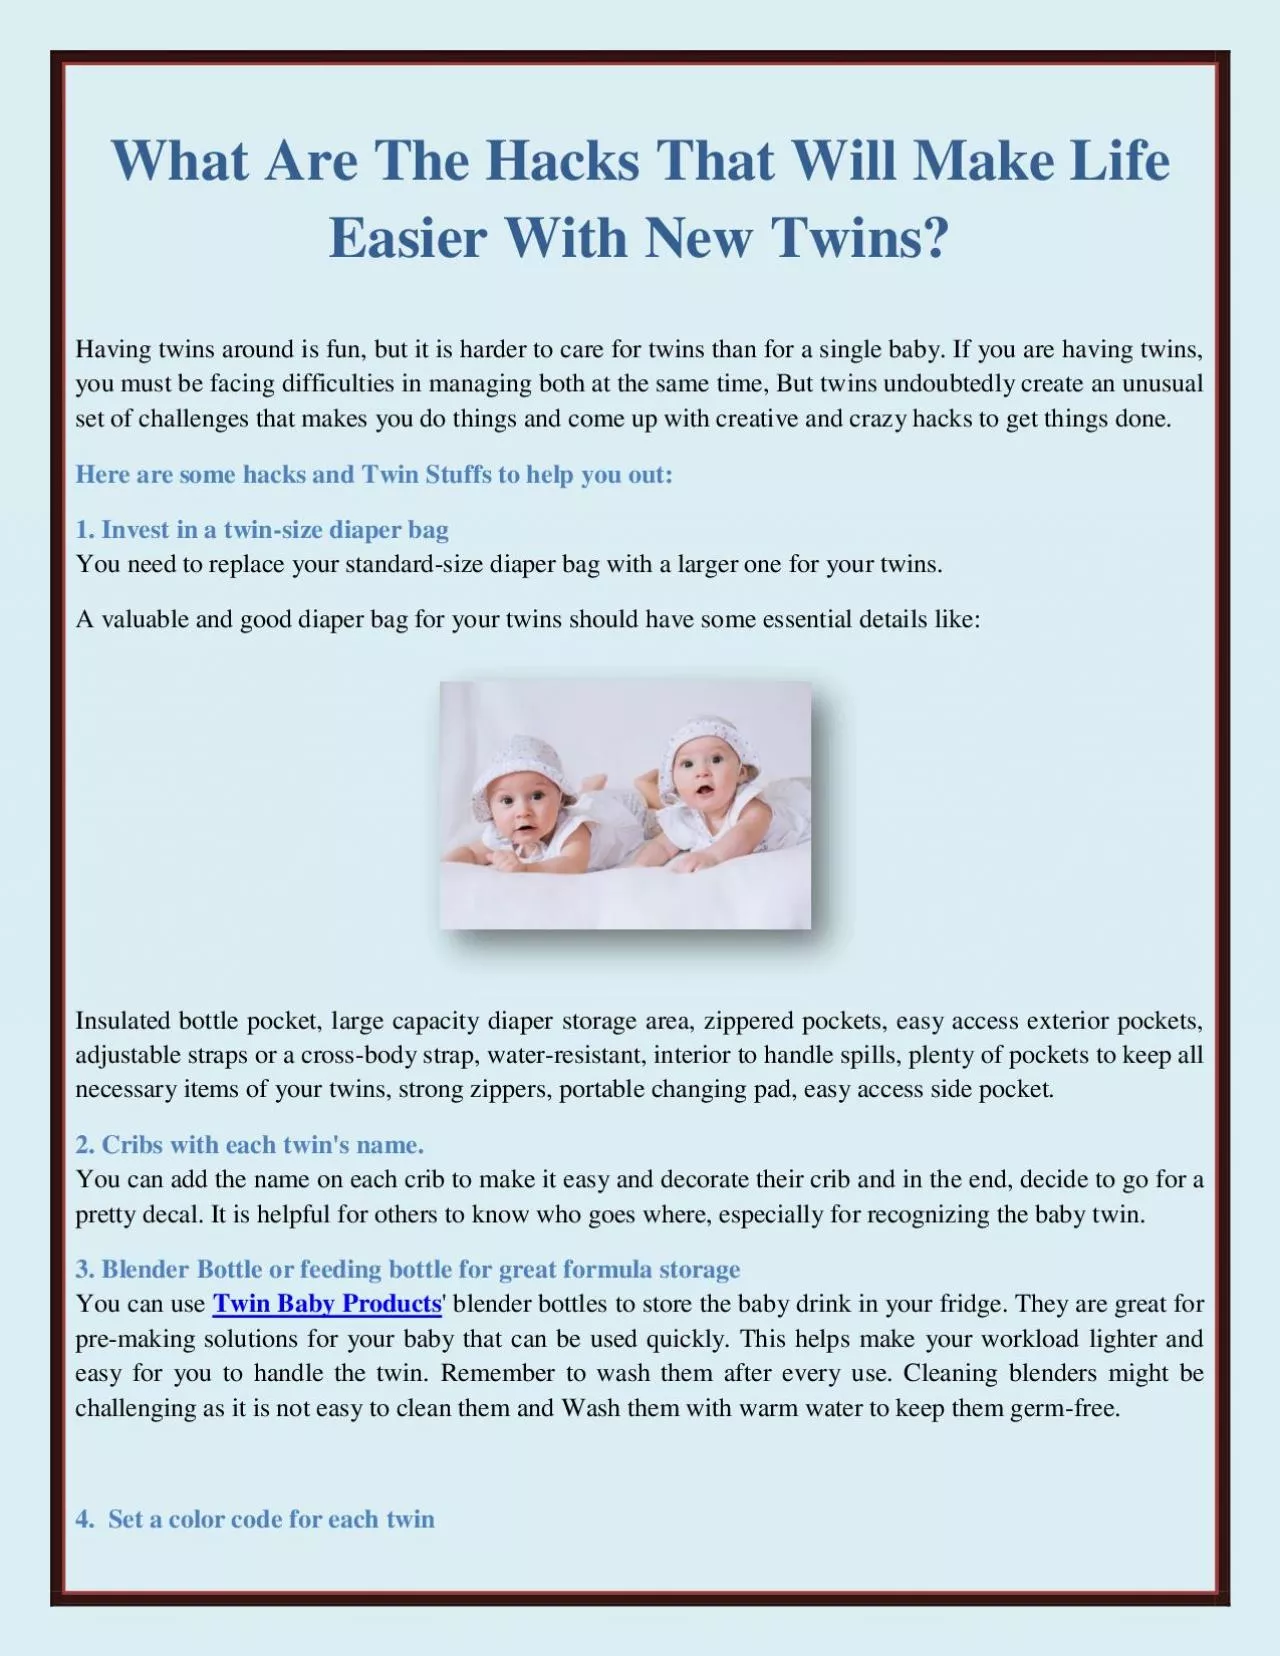 What Are The Hacks That Will Make Life Easier With New Twins?